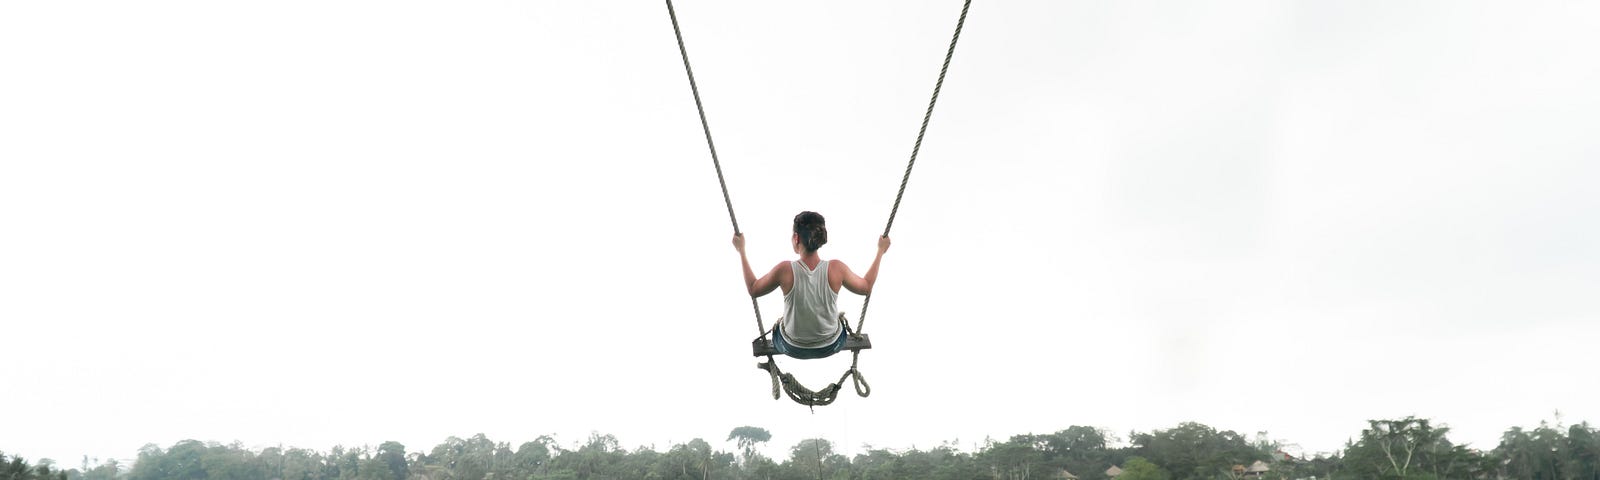 A horizontal photo of a woman wearing all white and her long brown hair up in a bun. She is captured swinging forth on a wide wooden swing with very long ropes off the edge of a cliff overlooking the treetops of a great luscious green forest. She is looking to her left as if distracted by wonderment. Itchy Feet: A poem about feeling wanderlust with a pauper’s pockets by Rambling Rose.